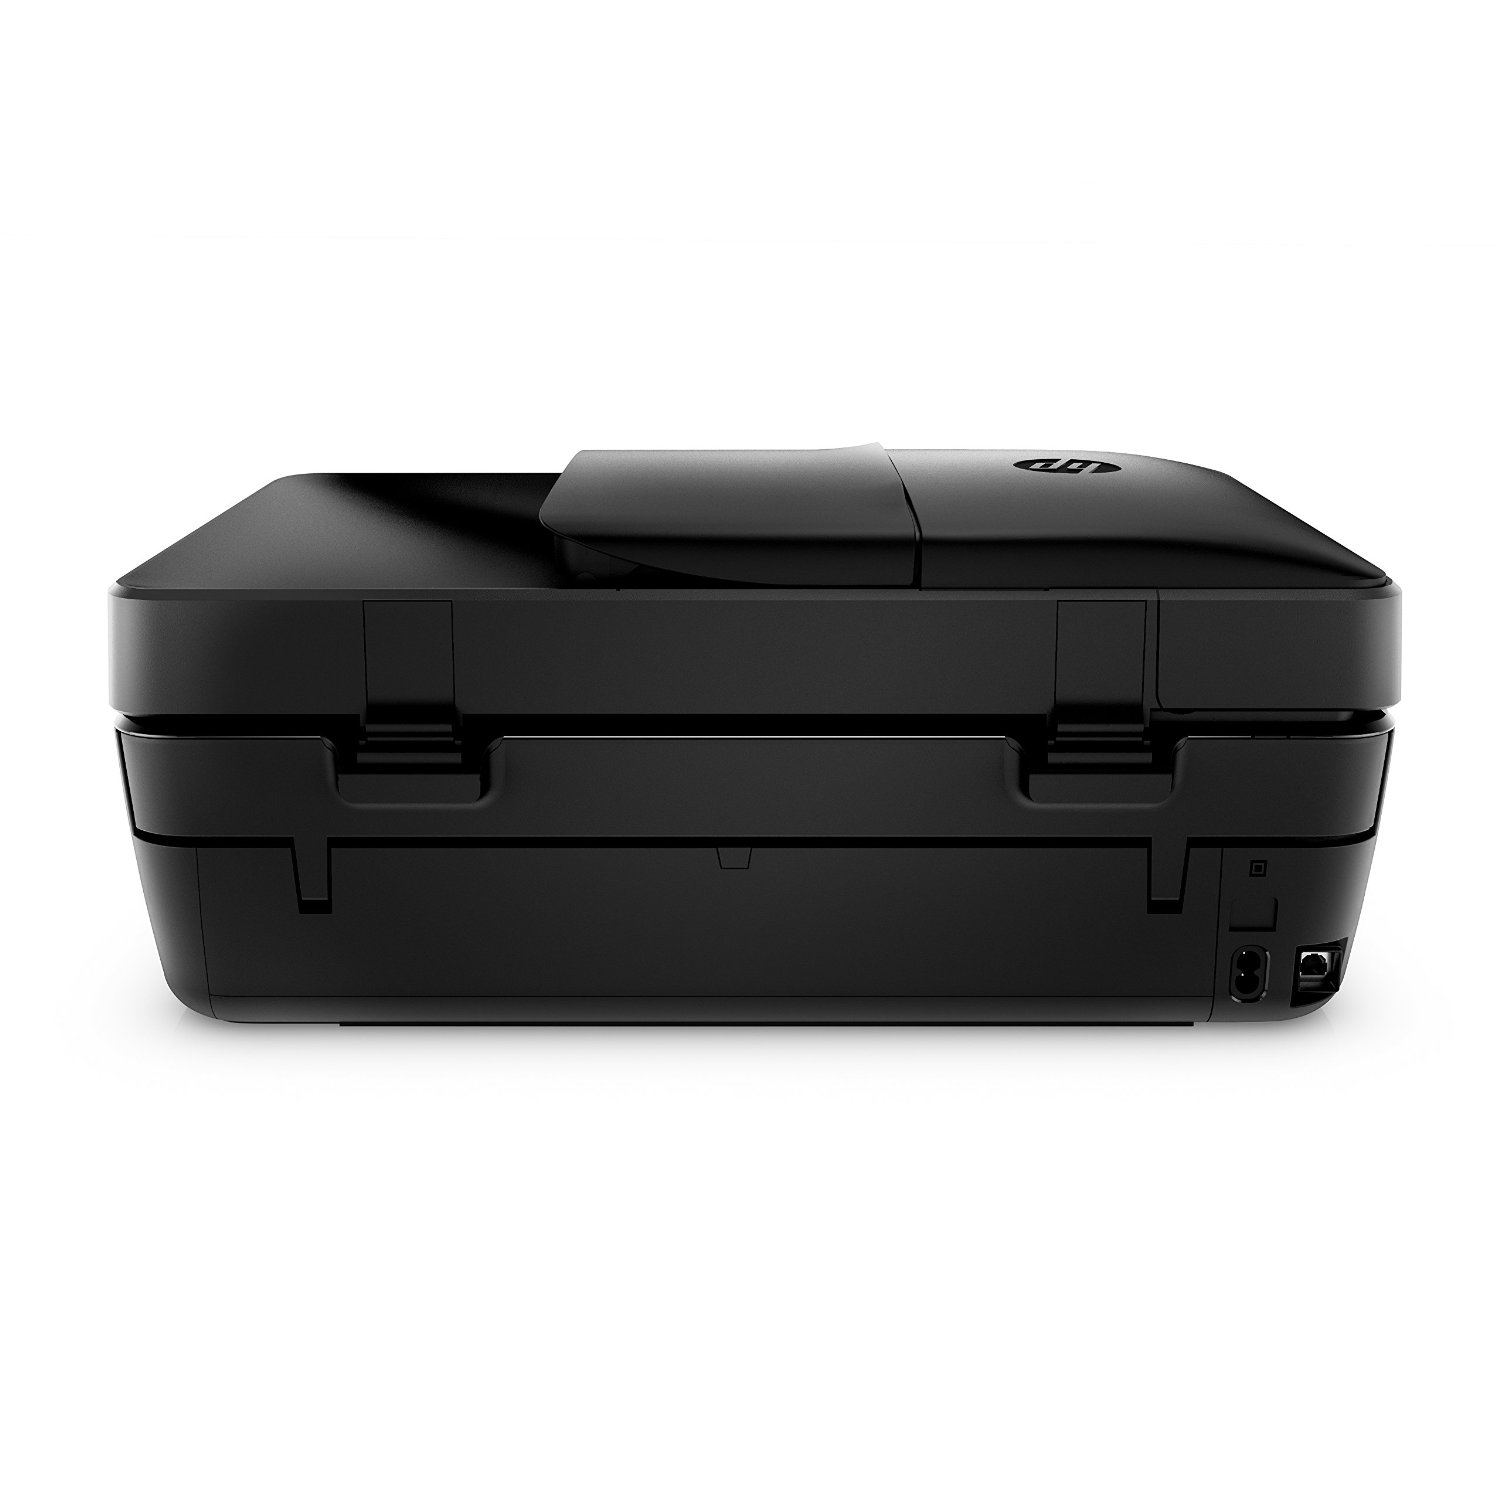 Hp Officejet 4650 Wireless All In One Photo Printer With Mobile Printing Instant Ink Ready 0456